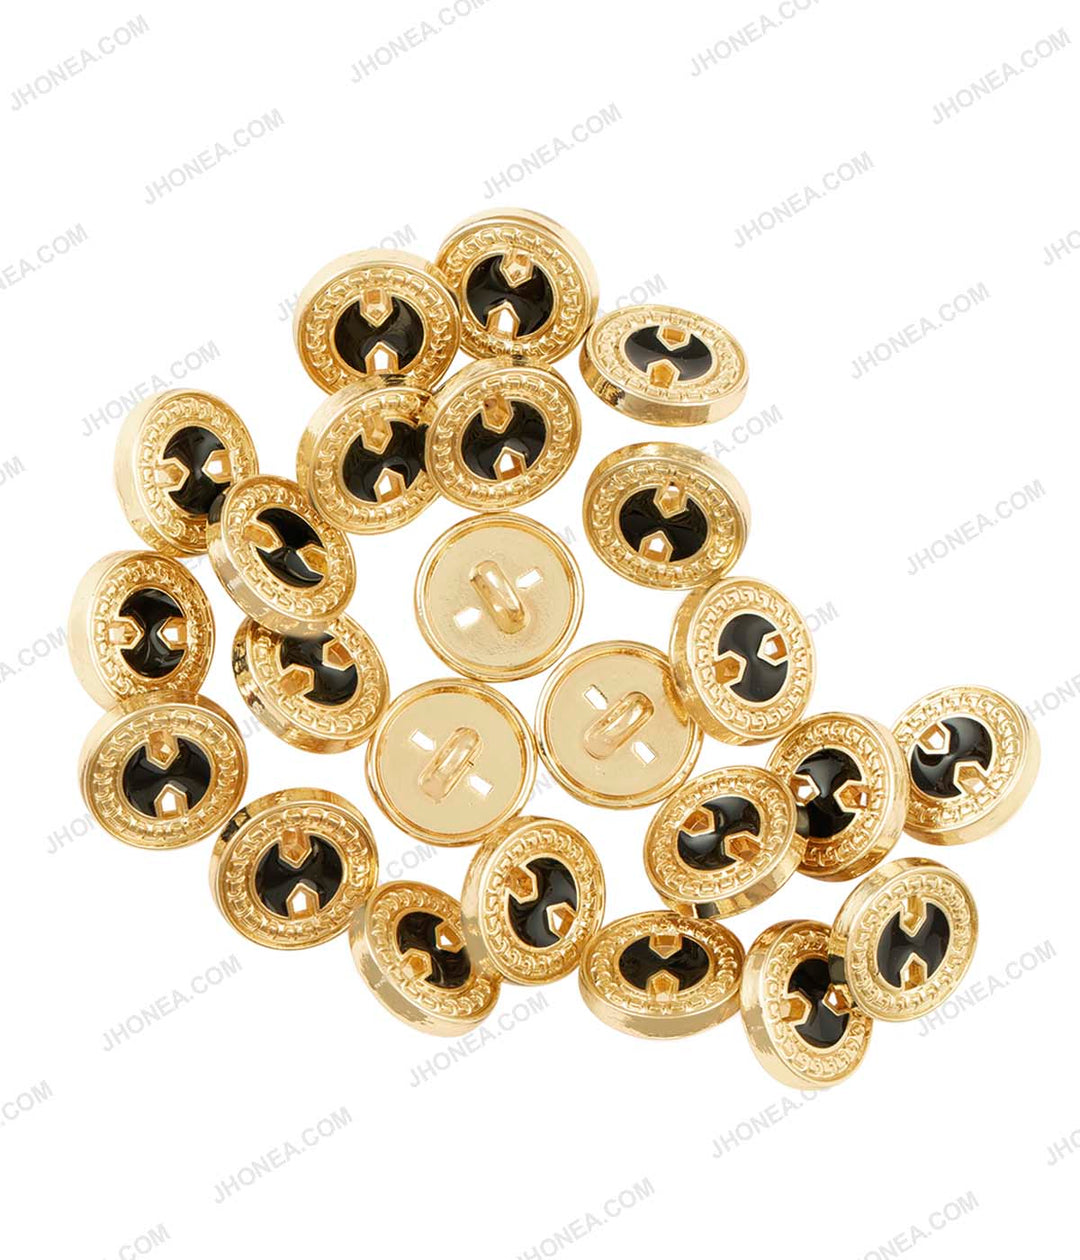 Shiny Bright Gold with Black Color Cutwork Enamel Royal Regal Buttons